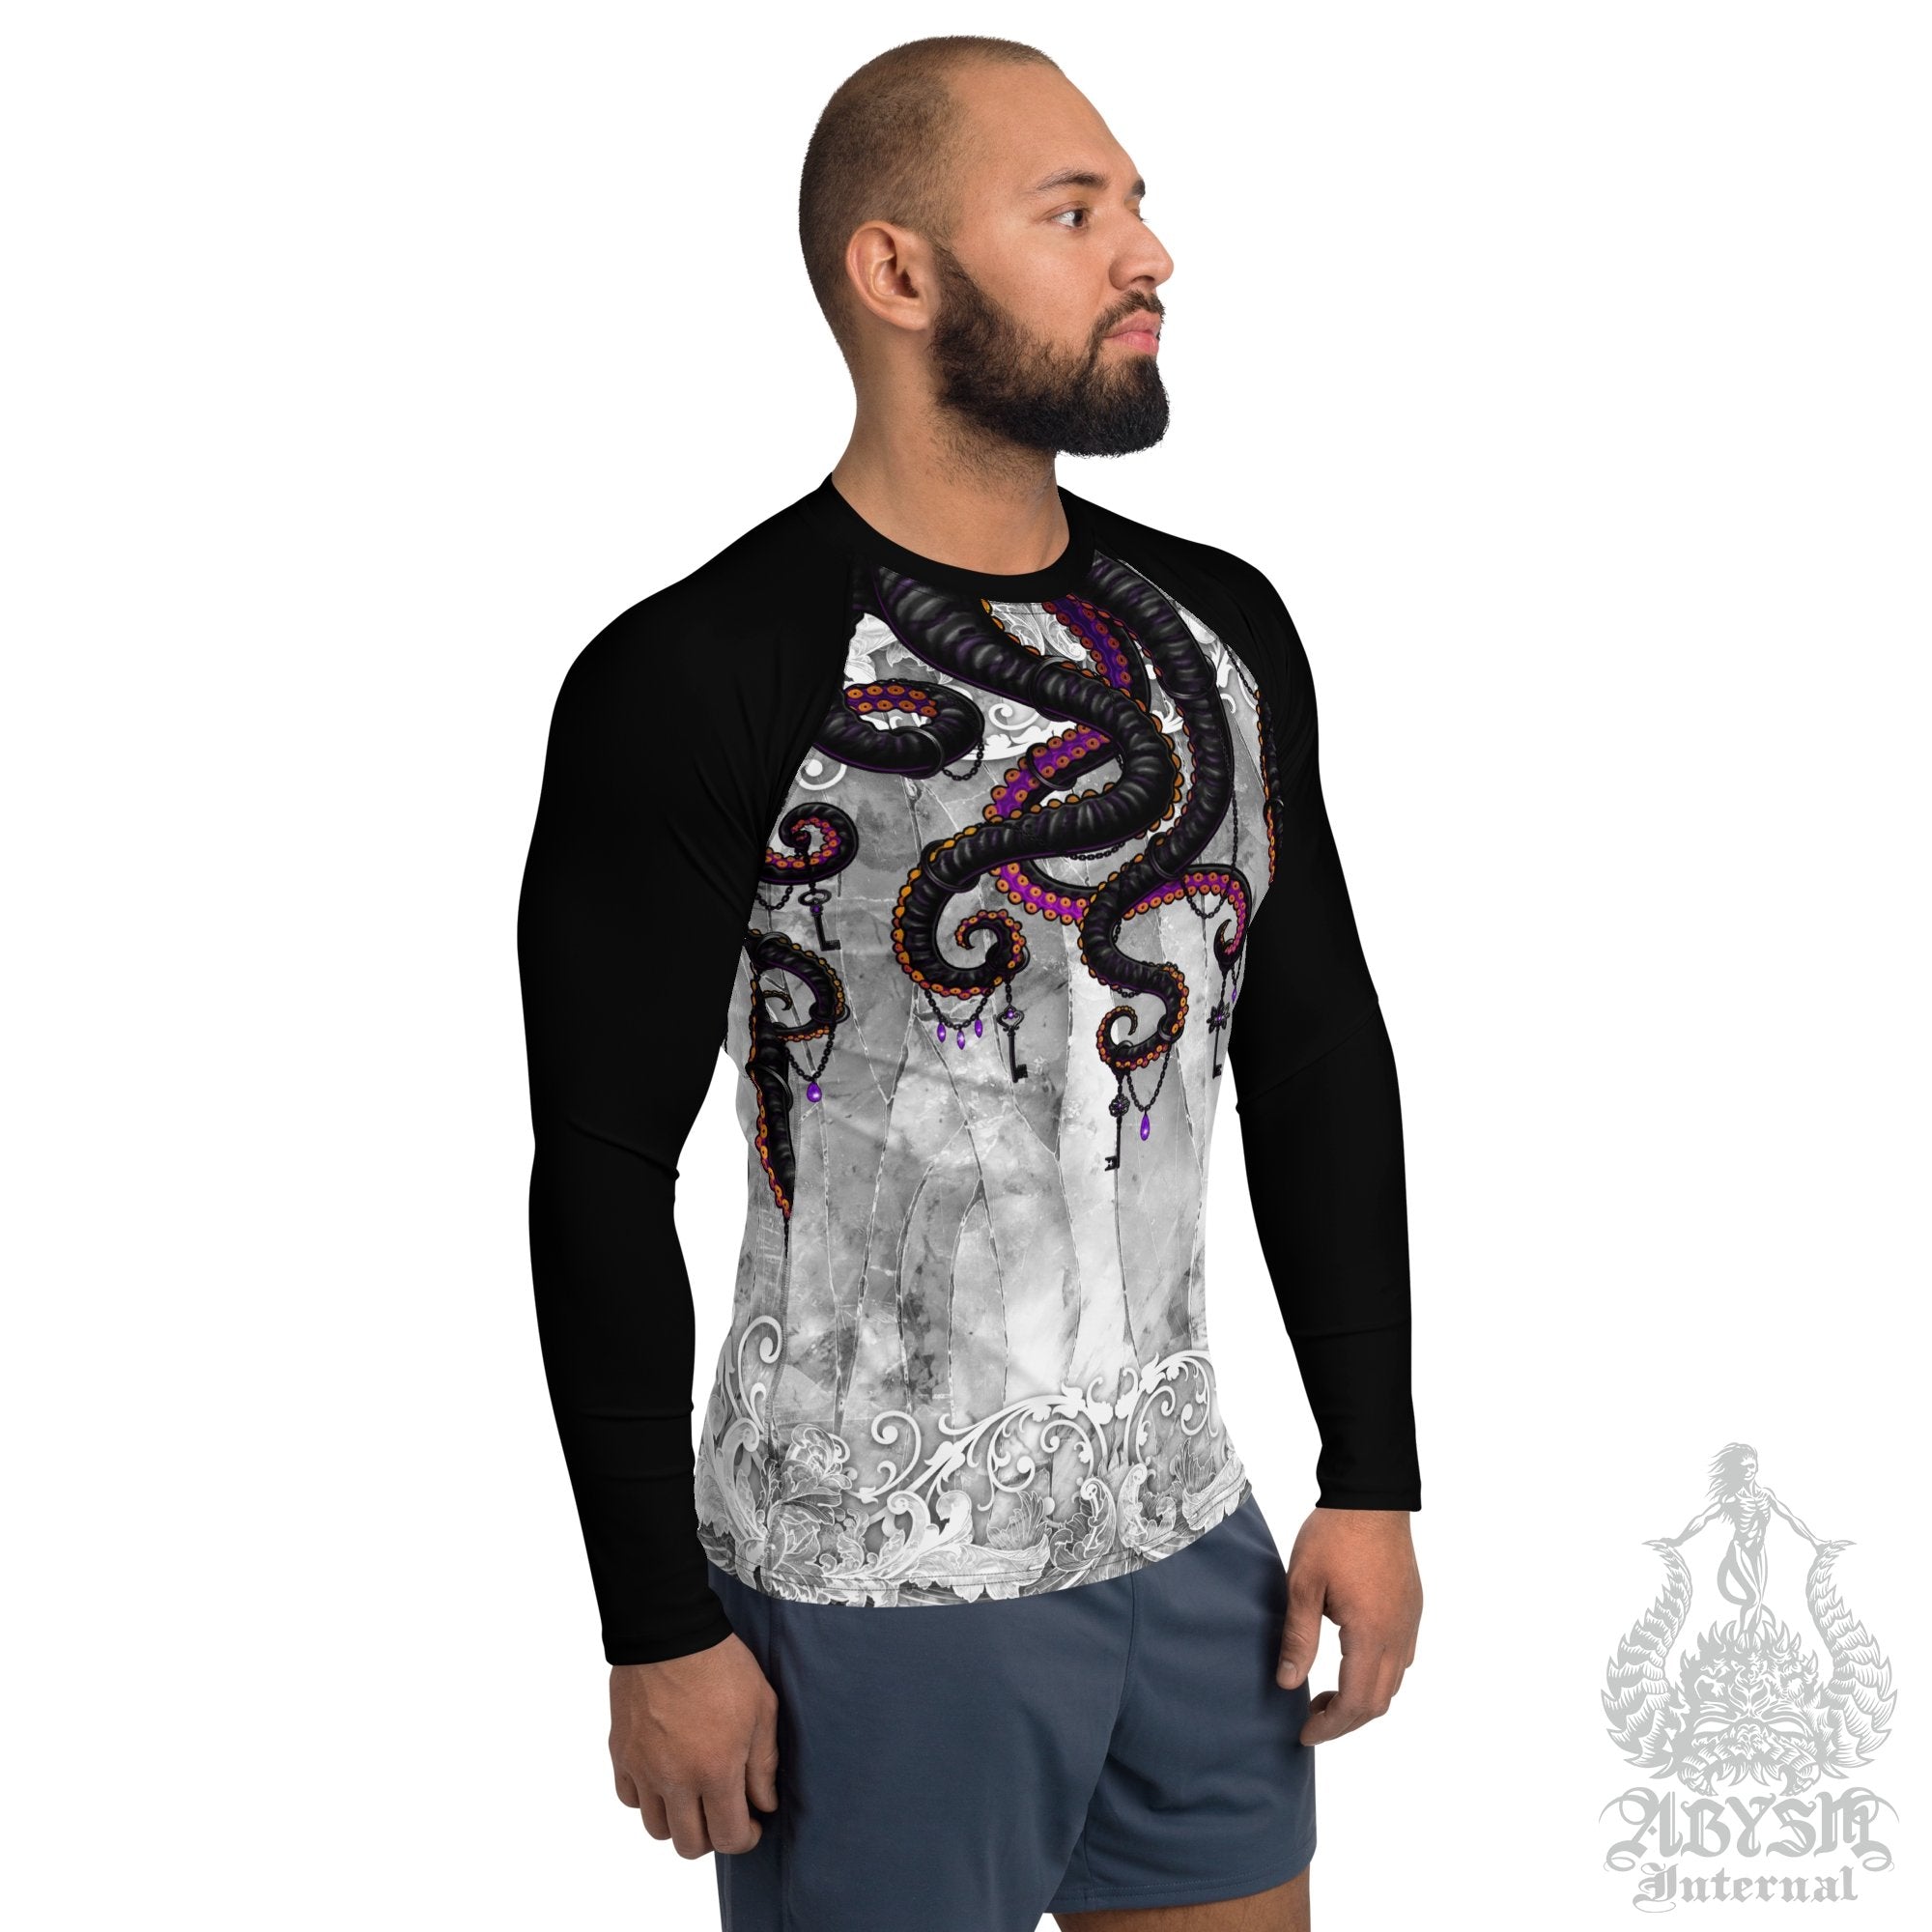 Octopus Men's Rash Guard, Long Sleeve spandex shirt for surfing, swimwear top for water sports - Stone Black and White Goth - Abysm Internal